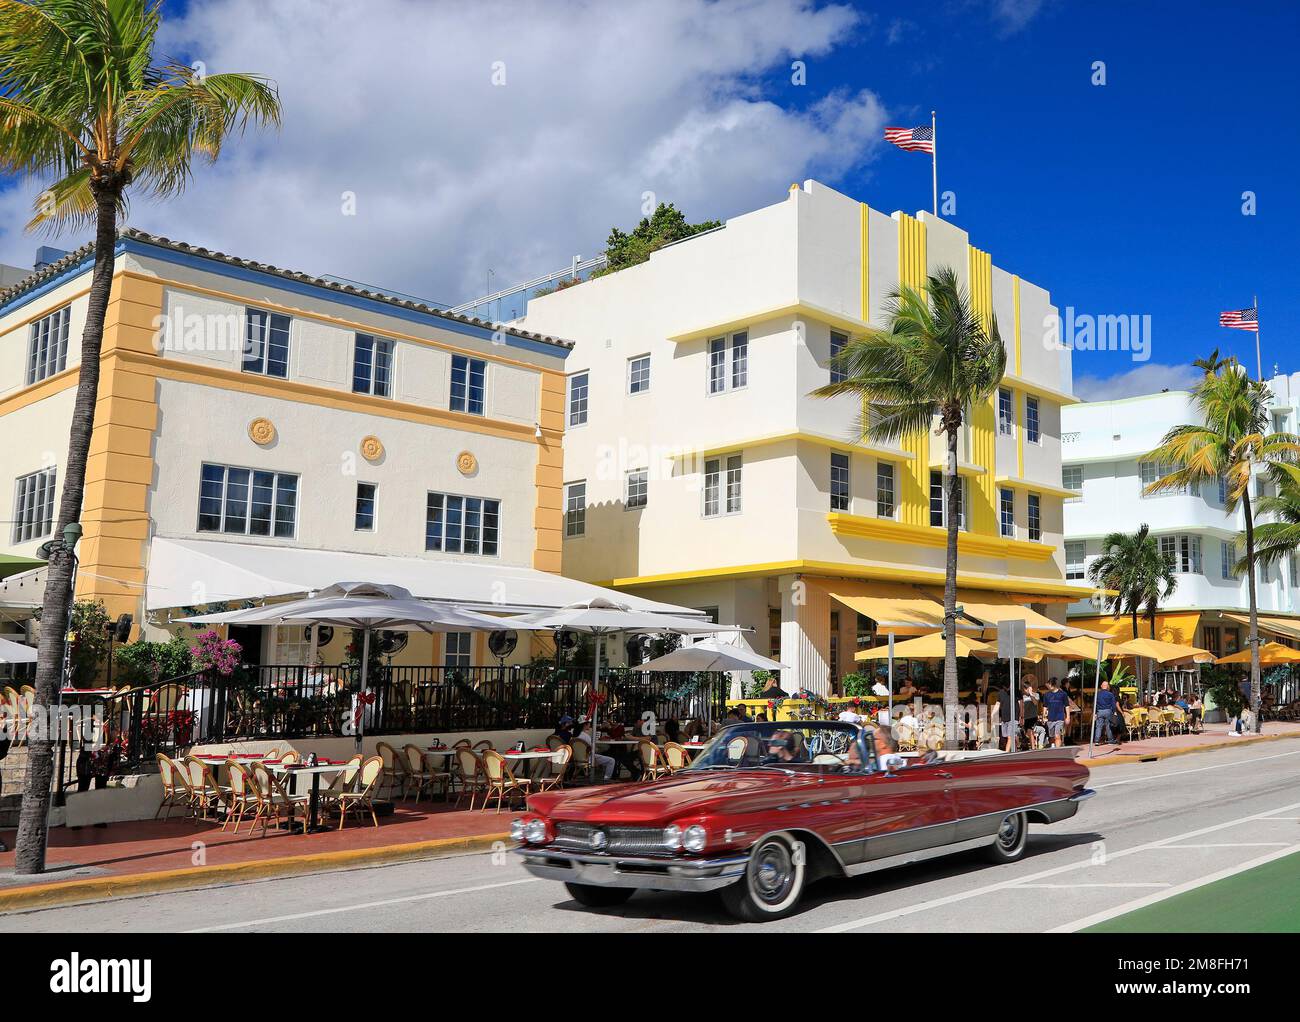 Morning vibes at Ocean Drive, tourists using a vintage classic convertible red American red car in Art Deco Historic District, Miami Beach Stock Photo